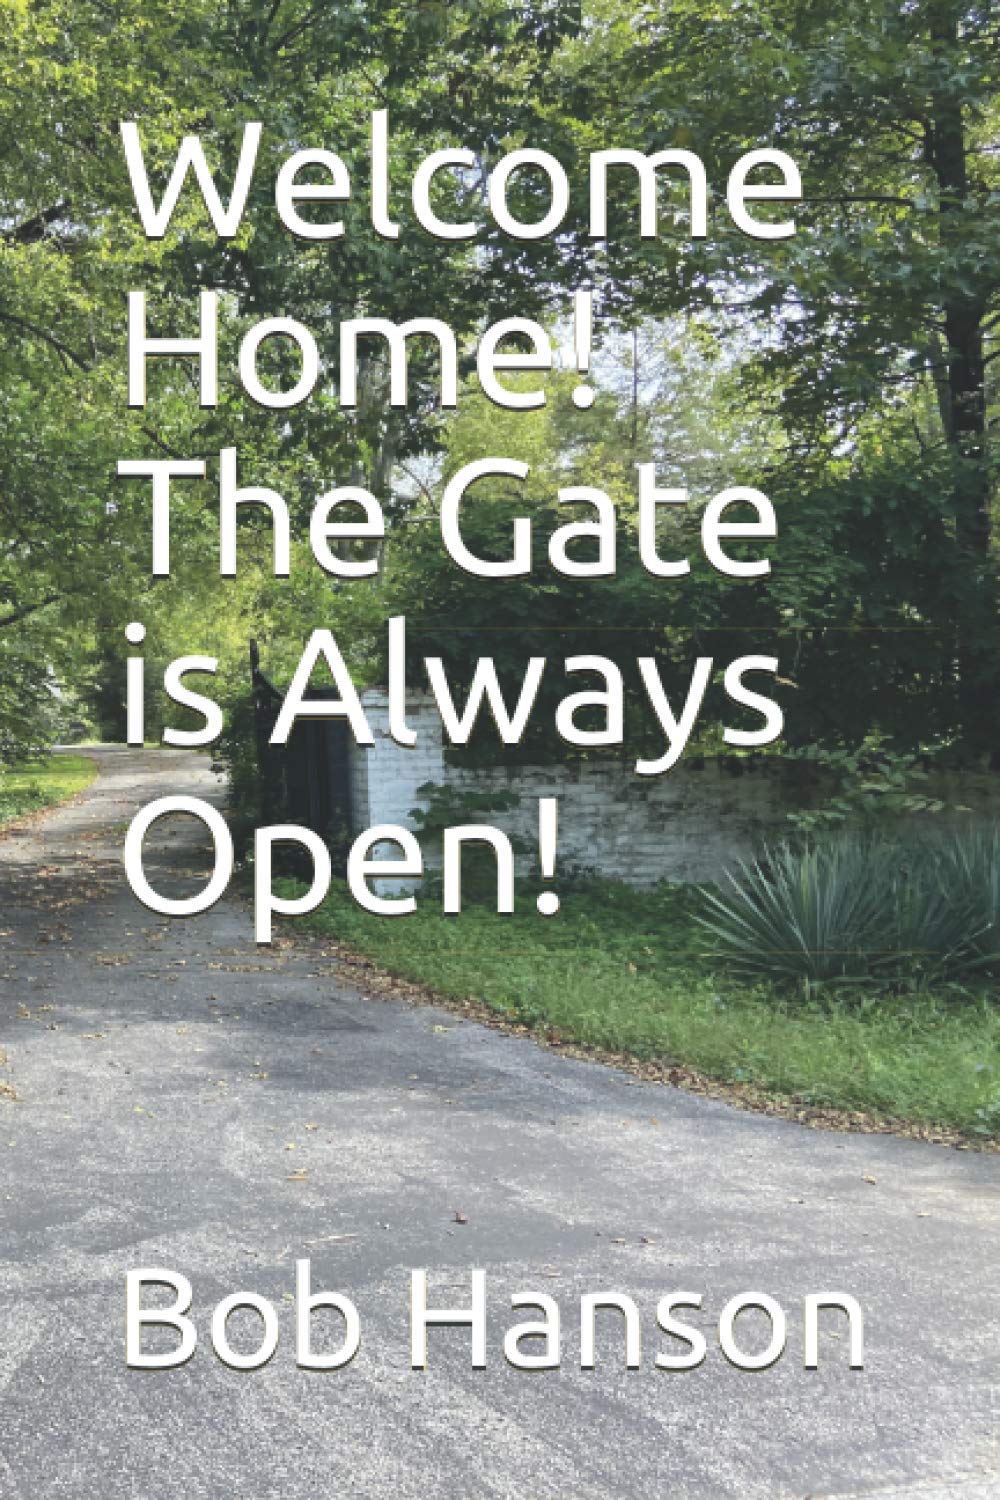 Welcome Home! The Gate Is Always Open